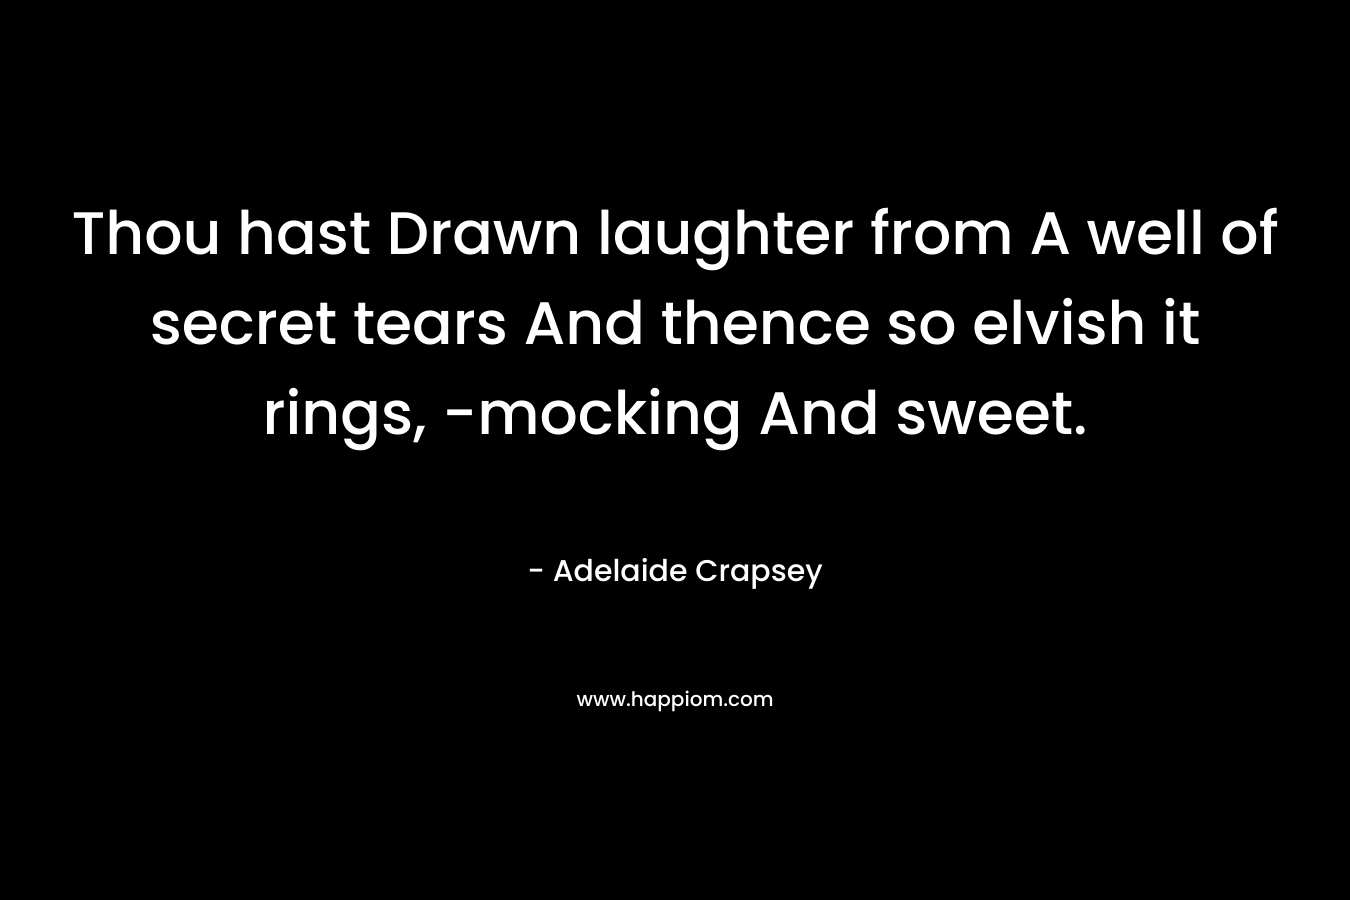 Thou hast Drawn laughter from A well of secret tears And thence so elvish it rings, -mocking And sweet.